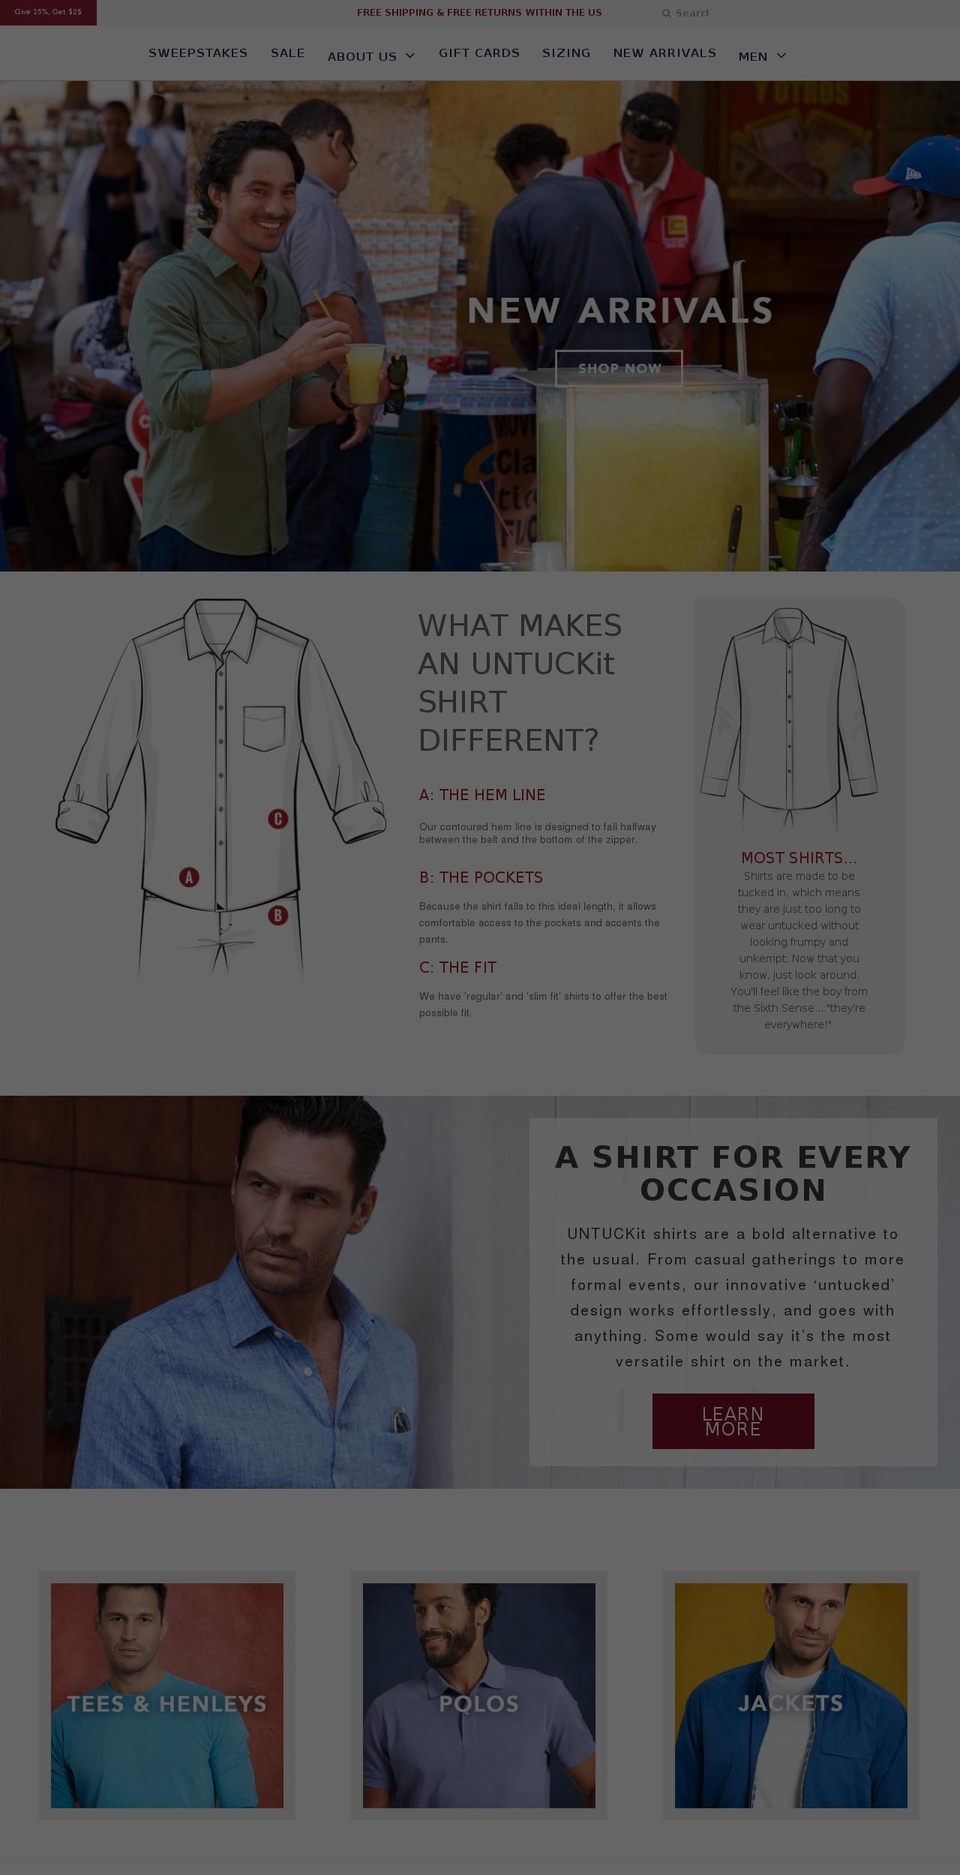 Production Shopify theme site example untuckit.com